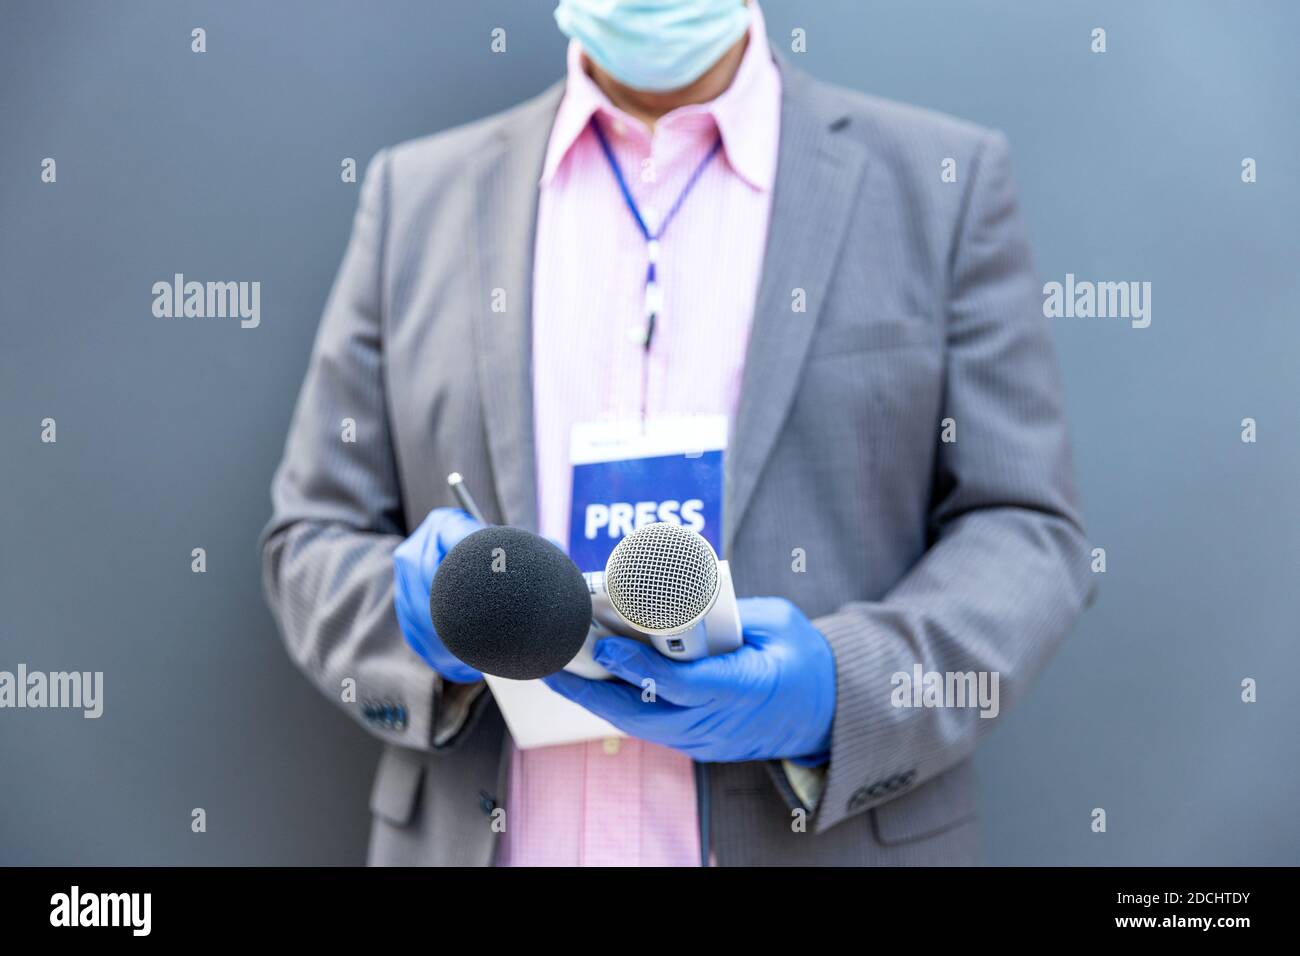 Journalist at news conference or media event wearing protective gloves and face mask against coronavirus COVID-19 disease holding microphone writing n Stock Photo